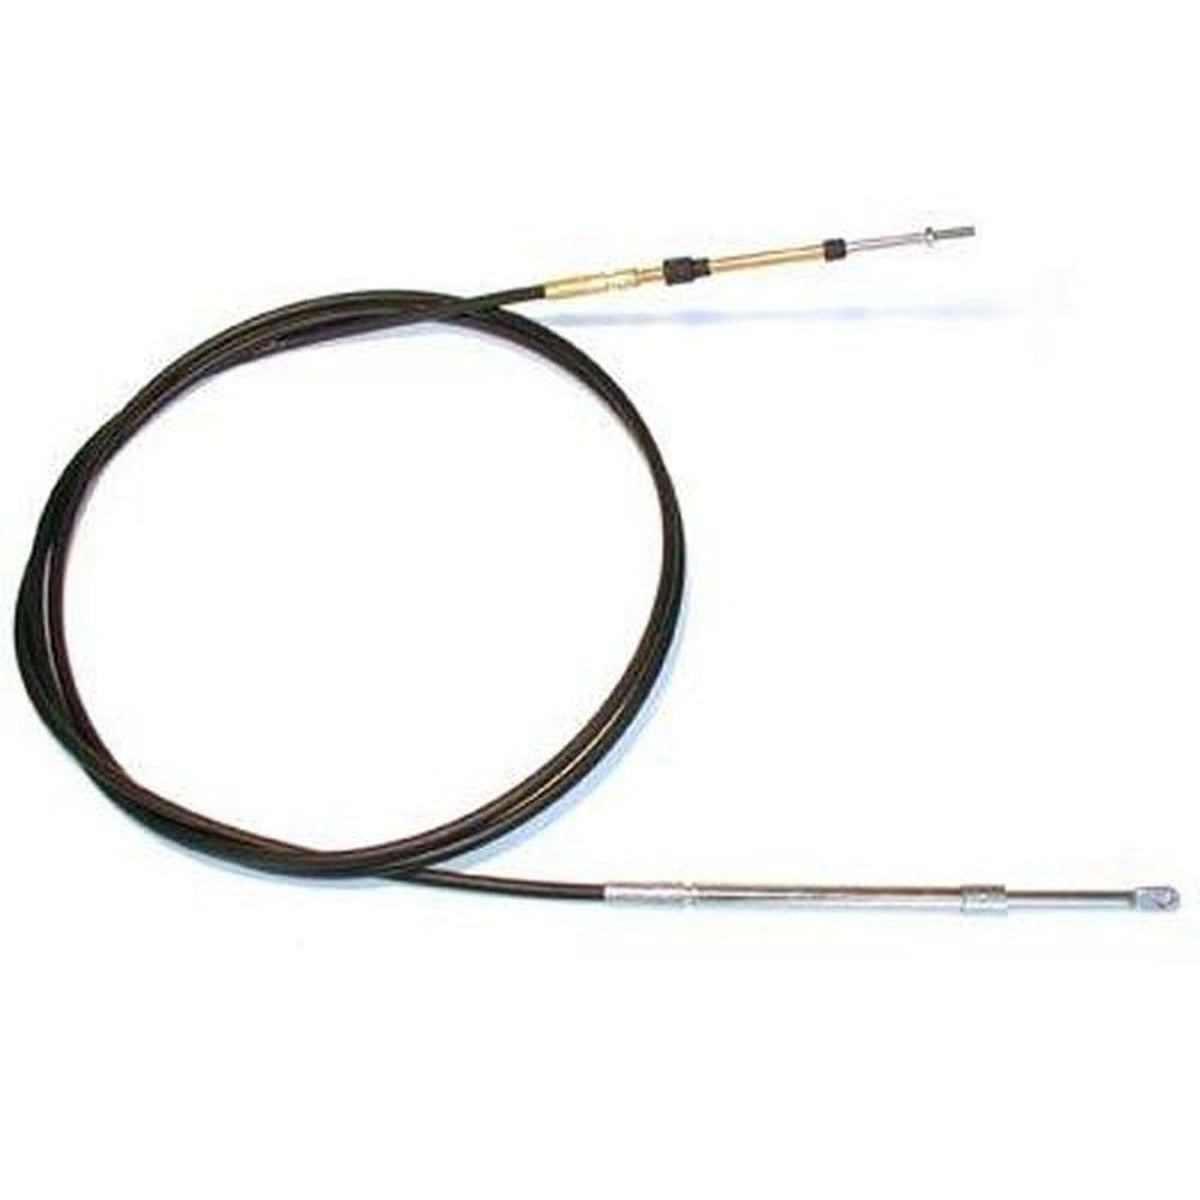 Teleflex Not Qualified for Free Shipping Teleflex 13' Gate Control Cable #CC21313